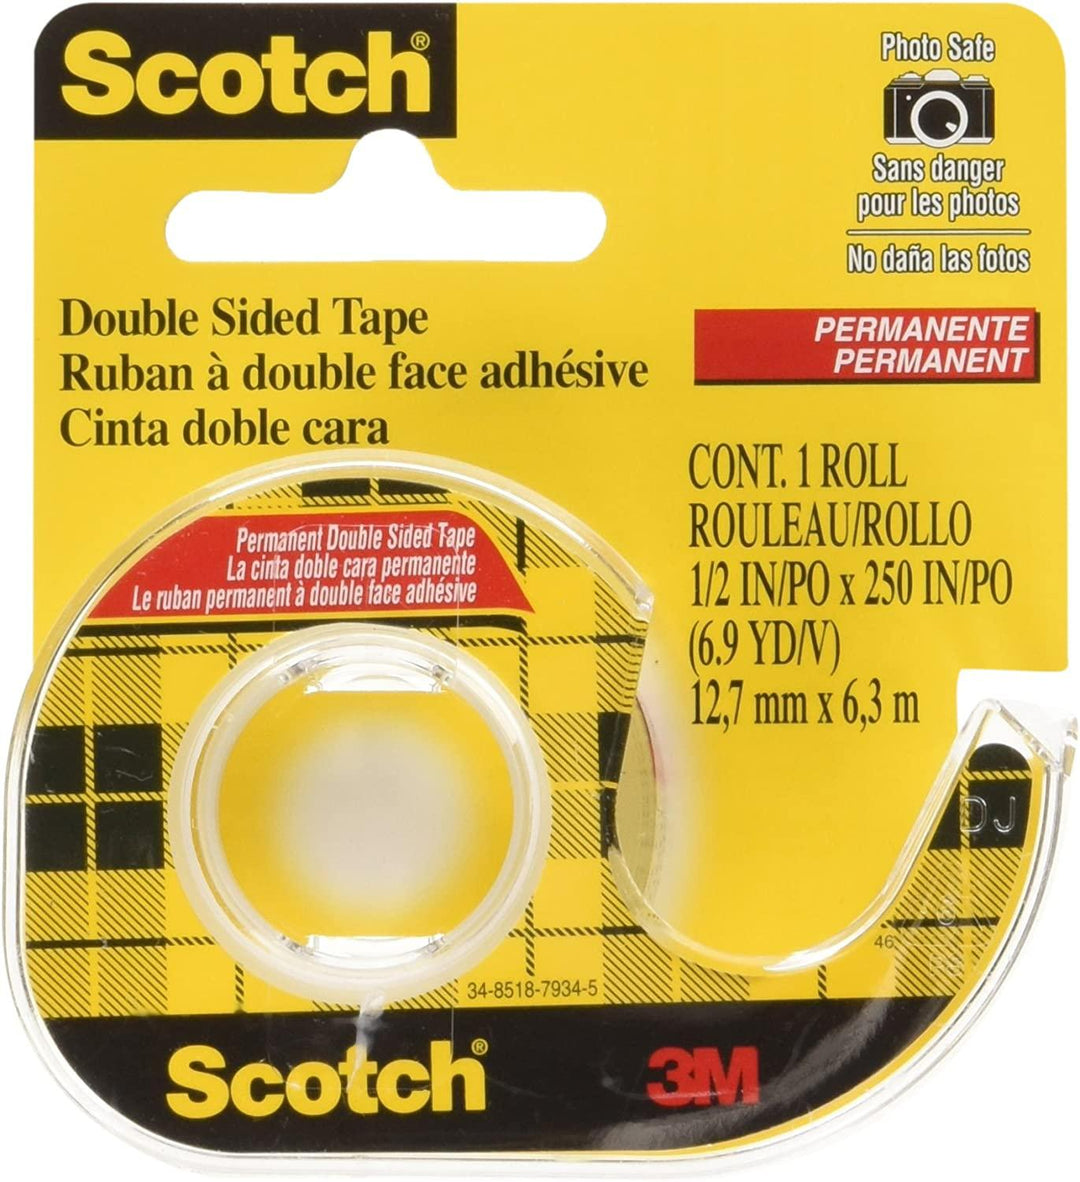 Scotch Double Sided Tape 12.7mm x 6.3m - Quecan